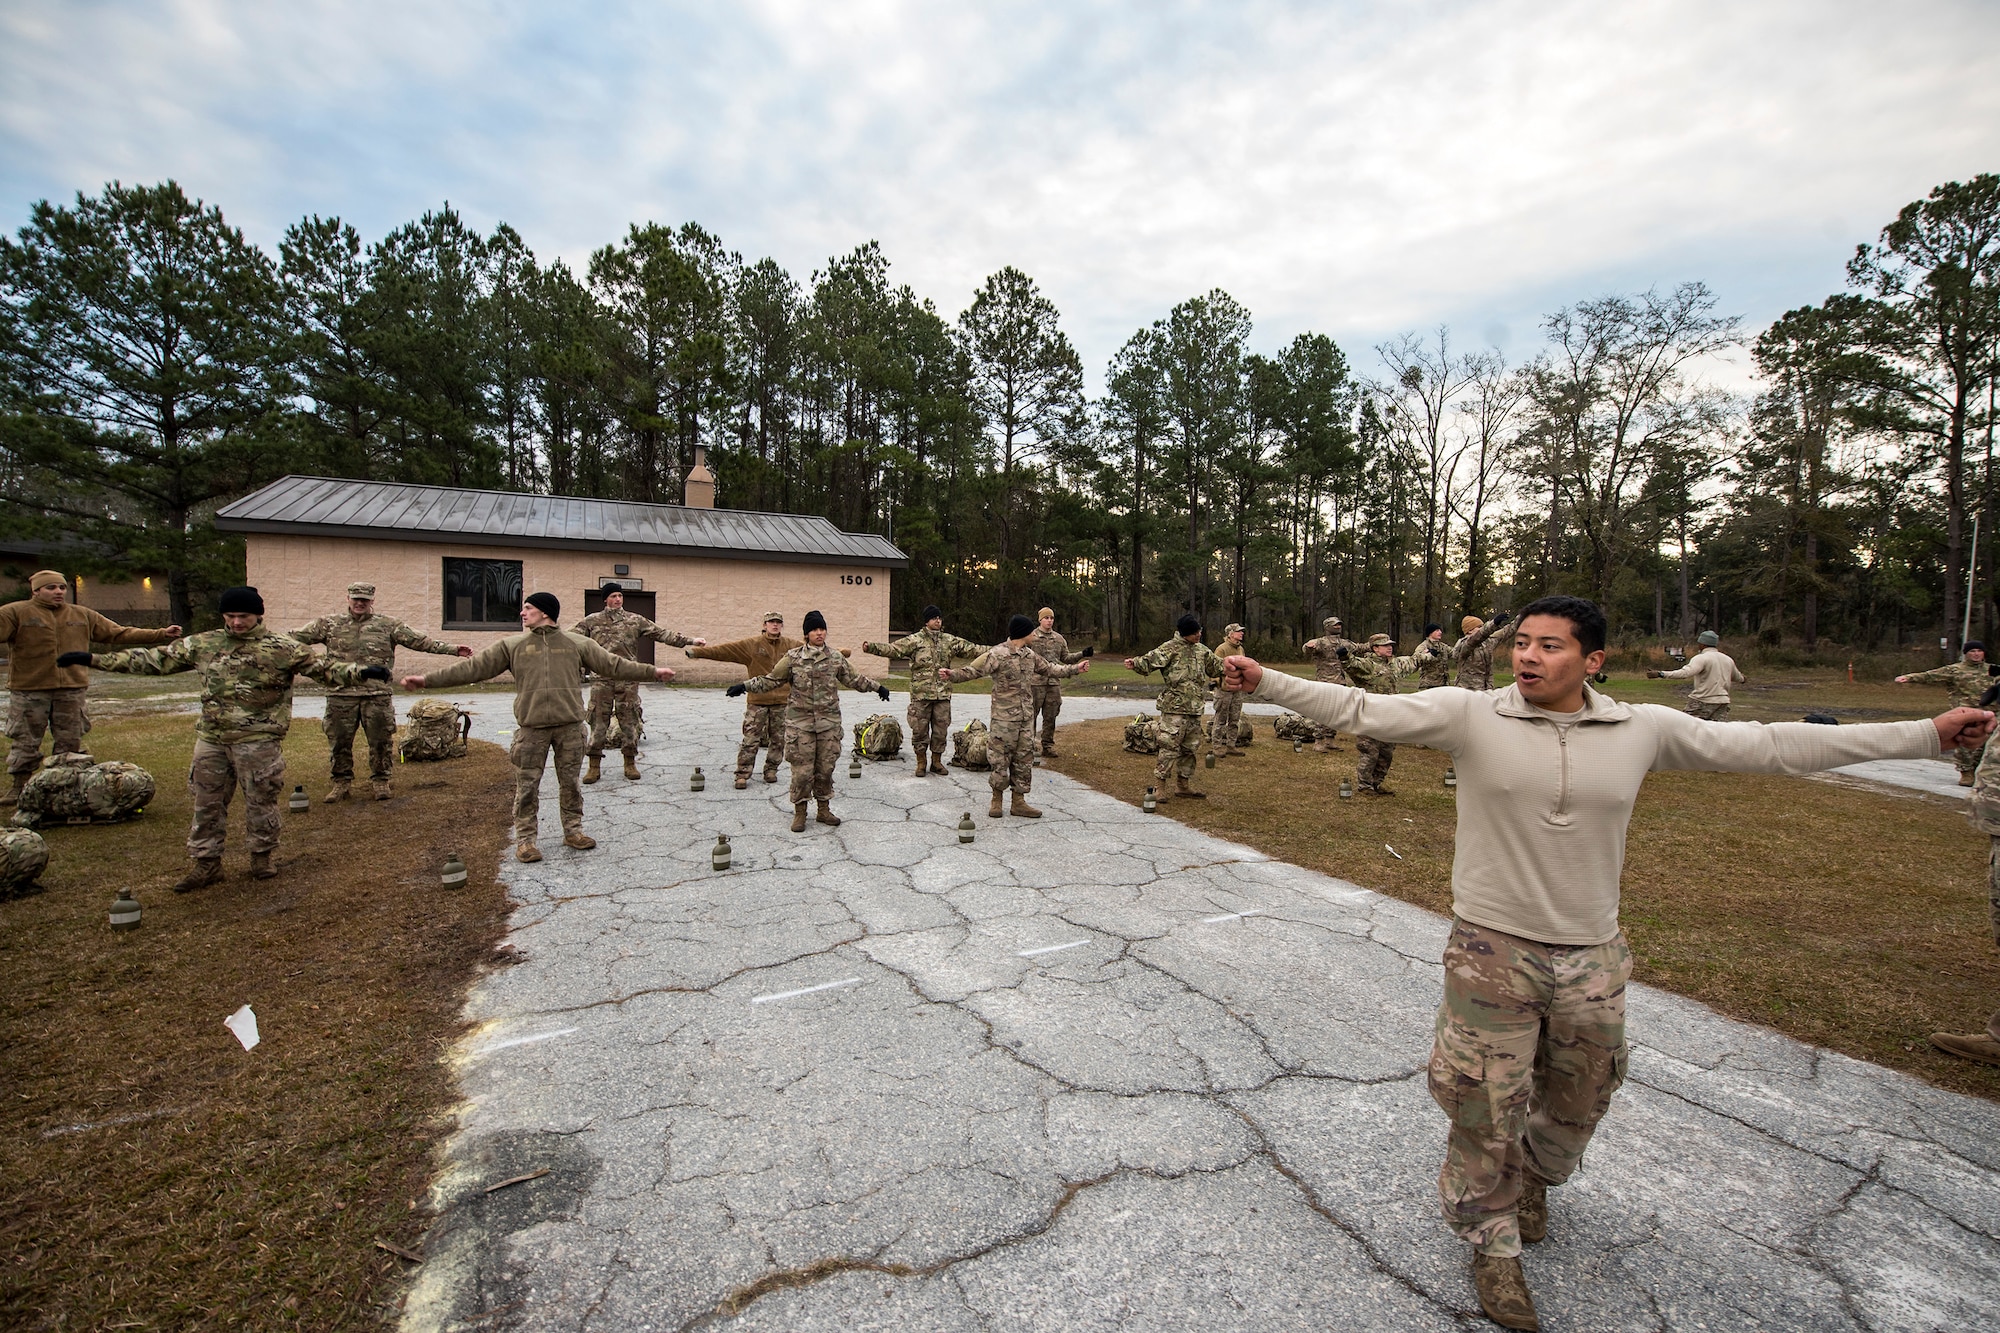 Staff Sgt. Ulysses Ortiz, right, 820th Combat Operations Squadron unit trainer and lead cadre team member, leads Airmen through calisthenics during an Army Air Assault Assessment (AAA), Jan. 31, 2019, at Moody Air Force Base, Ga. The AAA is designed to determine Airmen’s physical and mental readiness before being able to attend Army Air Assault school. (U.S. Air Force photo by Airman First Class Eugene Oliver)